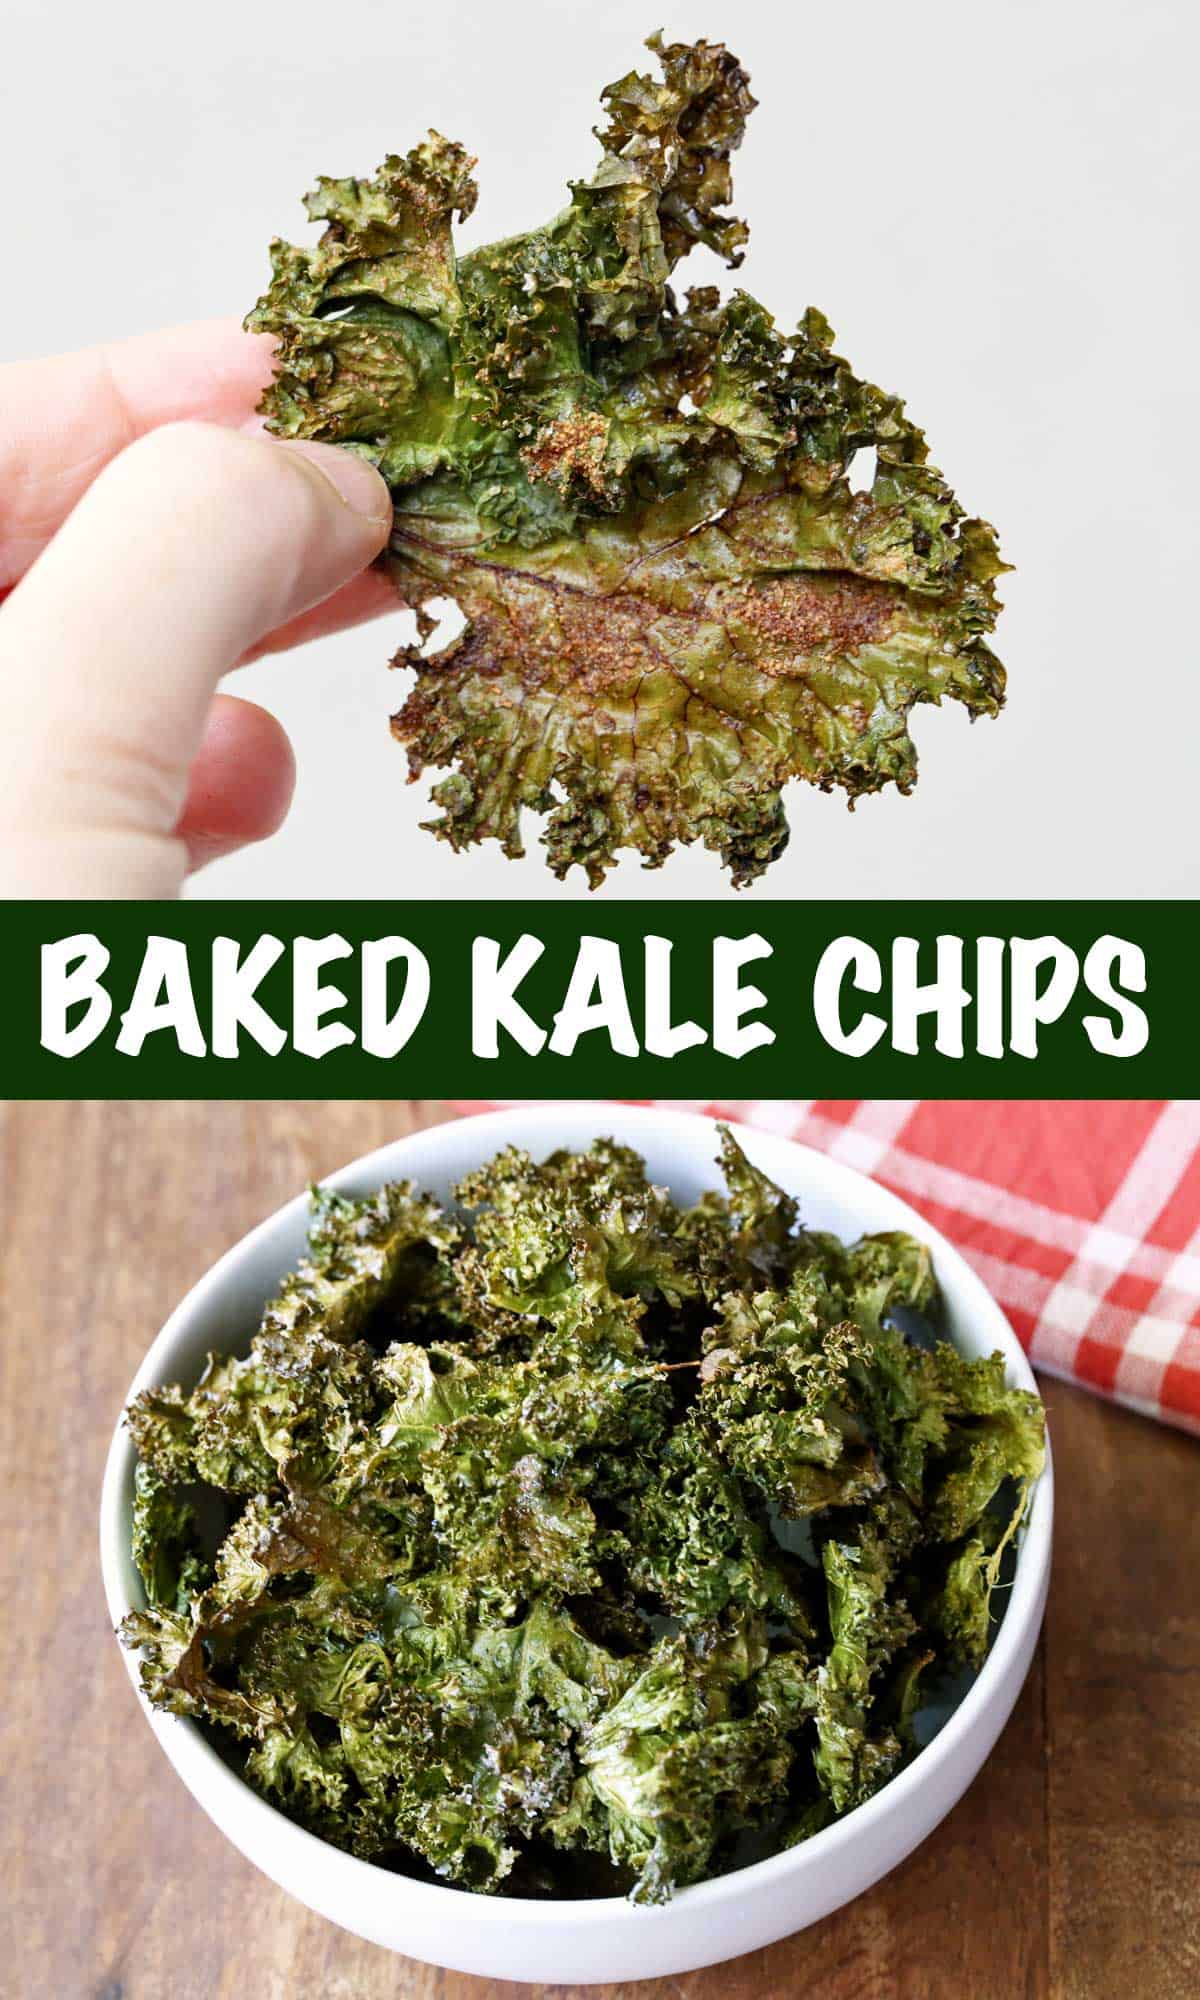 Two kale chips photos - a chip held in a hand and a bowl of chips. 